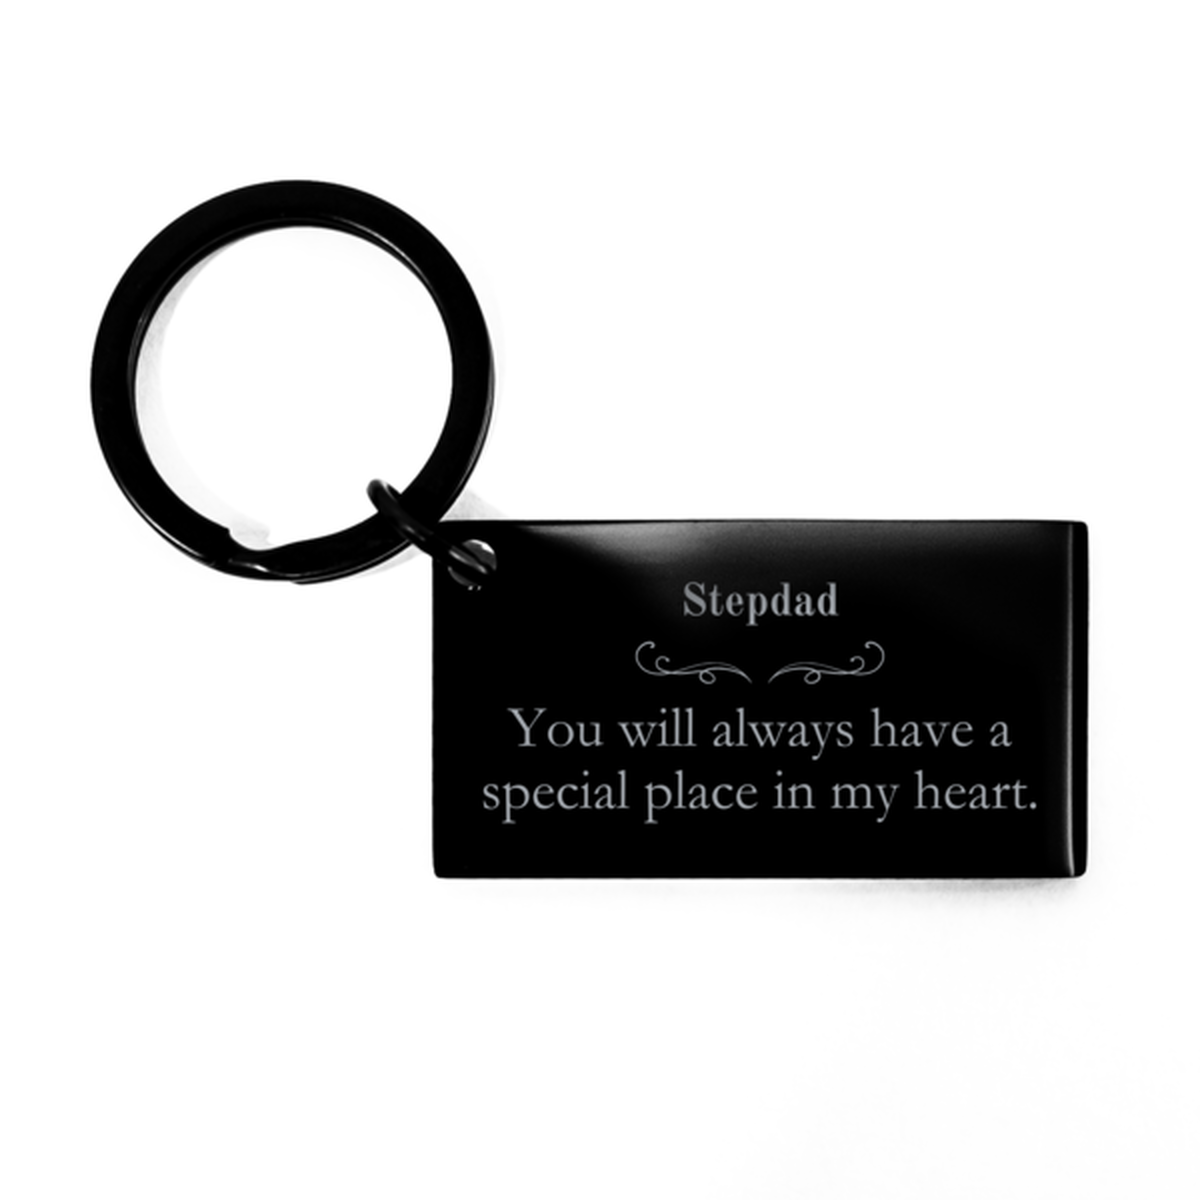 Stepdad Keychain You will always have a special place in my heart. Engraved Gift for Fathers Day, Birthday, Christmas, and Special Occasions - Unique metal keychain for Stepdad - Inspirational and meaningful present for Stepdad